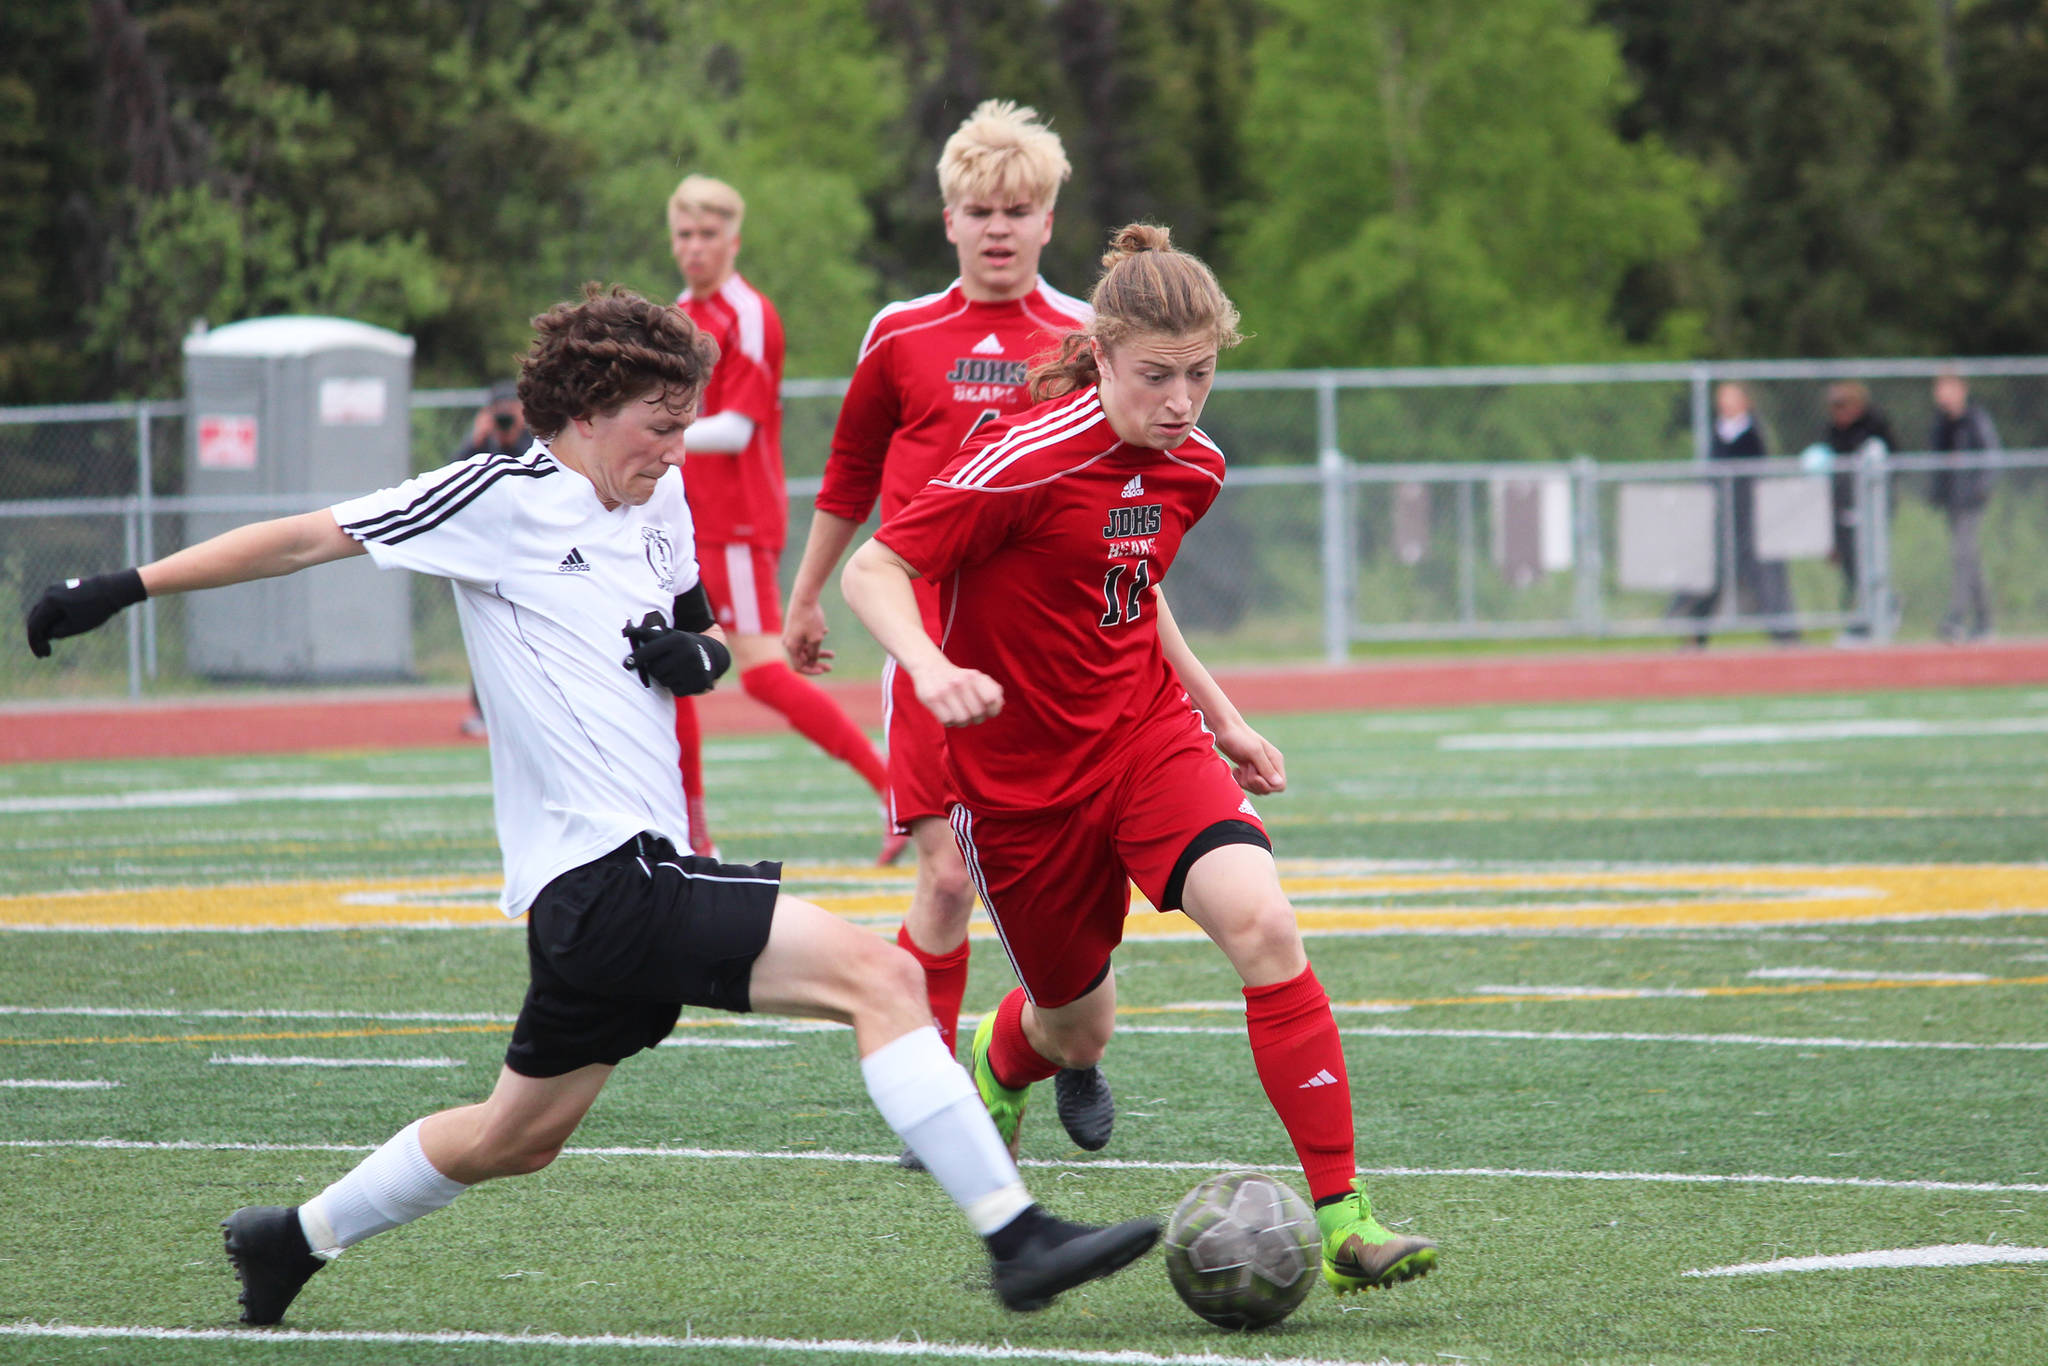 Kenai’s Damien Redder (left) fights for the ball with Juneau’s Jackson Norberg during the championship game of the Division II state soccer tournament Saturday, May 25, 2019 at Service High School in Anchorage, Alaska. (Photo by Megan Pacer/Homer News)